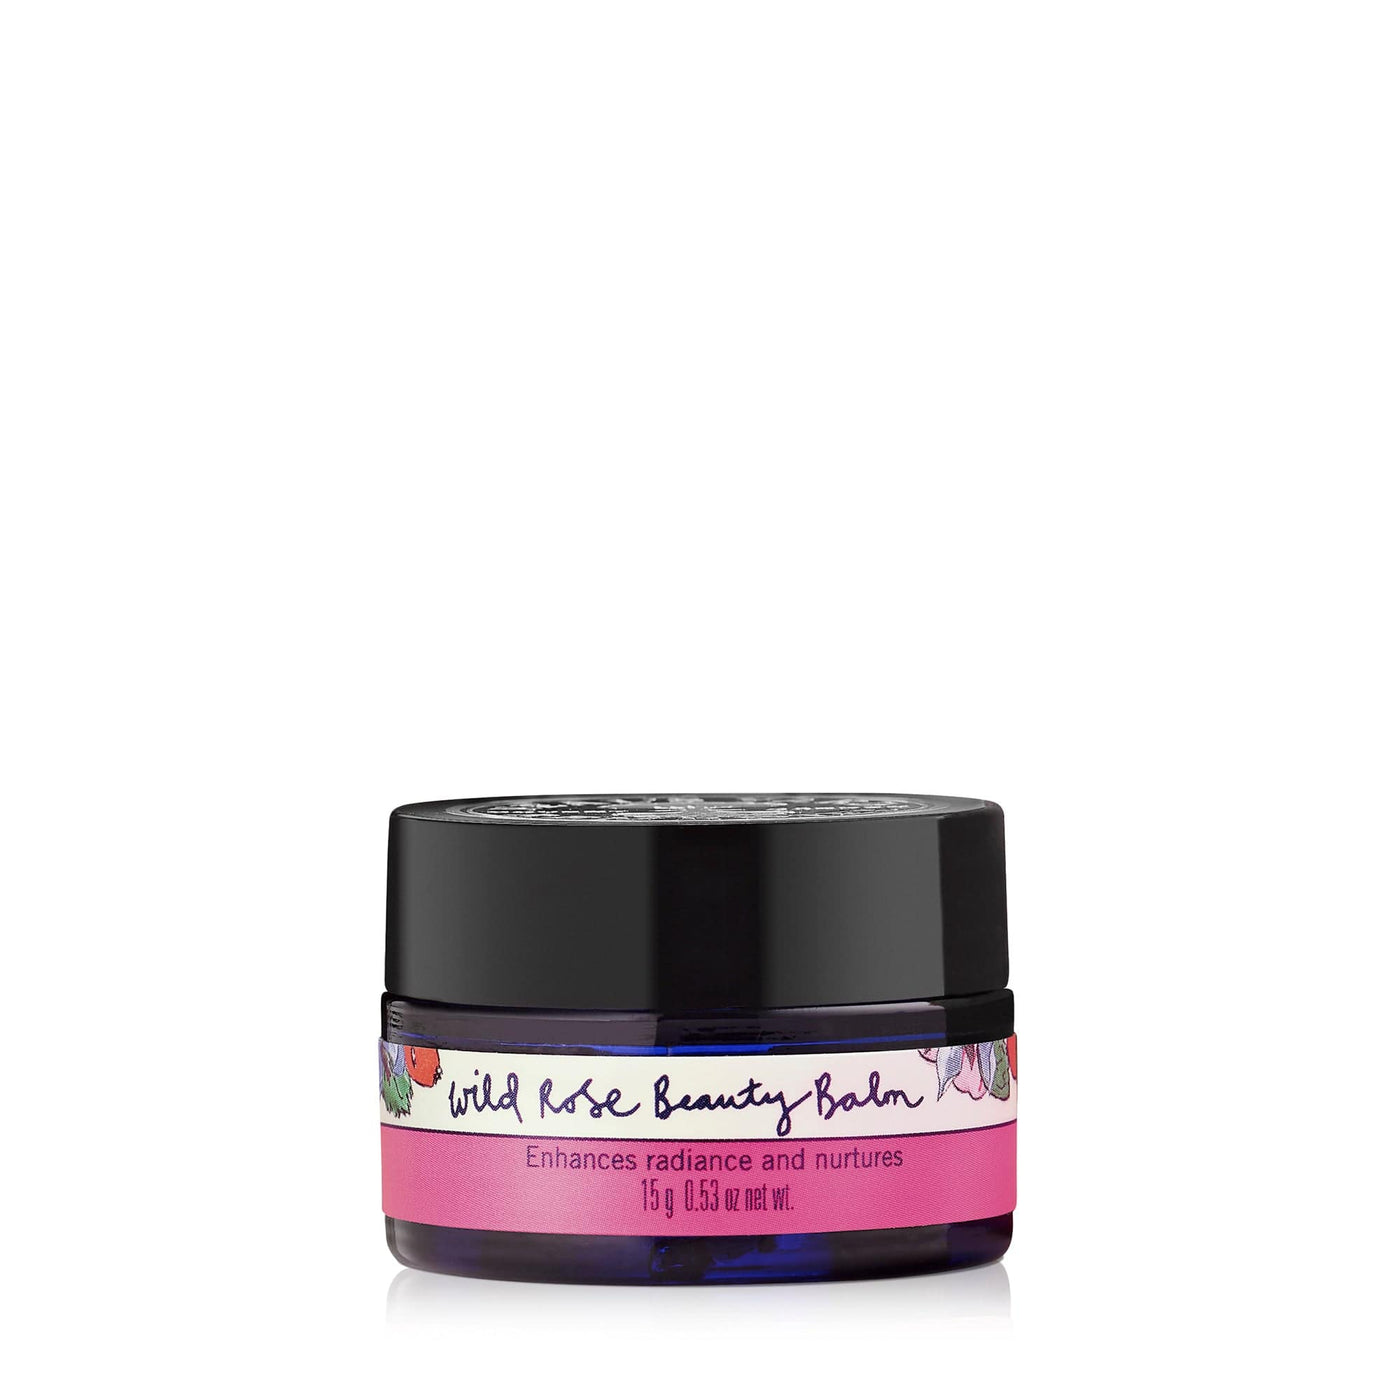 Neal's Yard Remedies Skincare Wild Rose Beauty Balm - Try Me Size 0.53oz